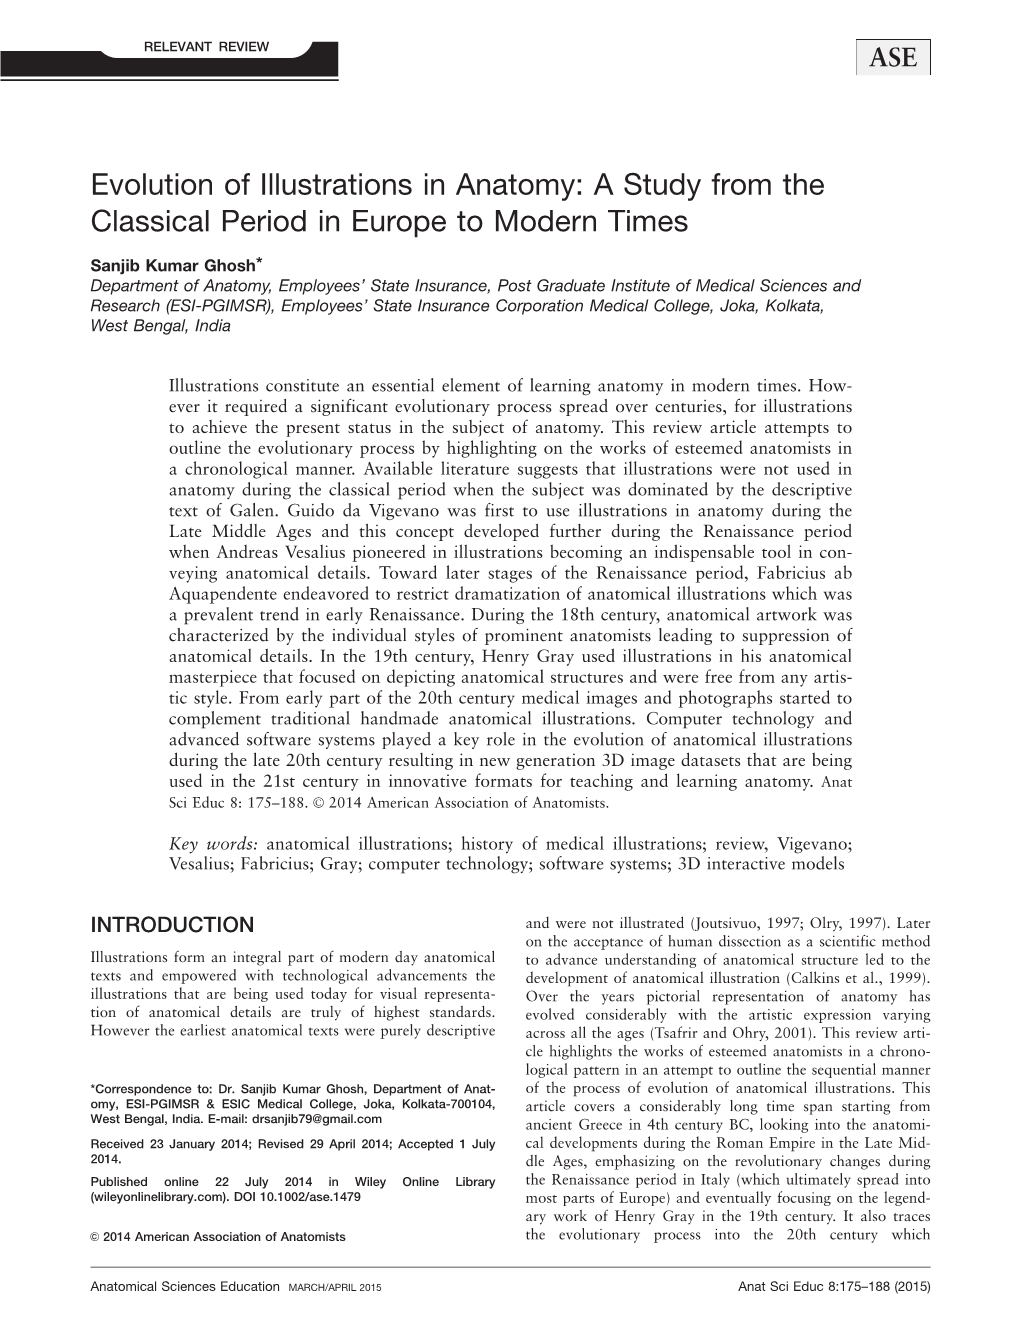 Evolution of Illustrations in Anatomy: a Study from the Classical Period in Europe to Modern Times